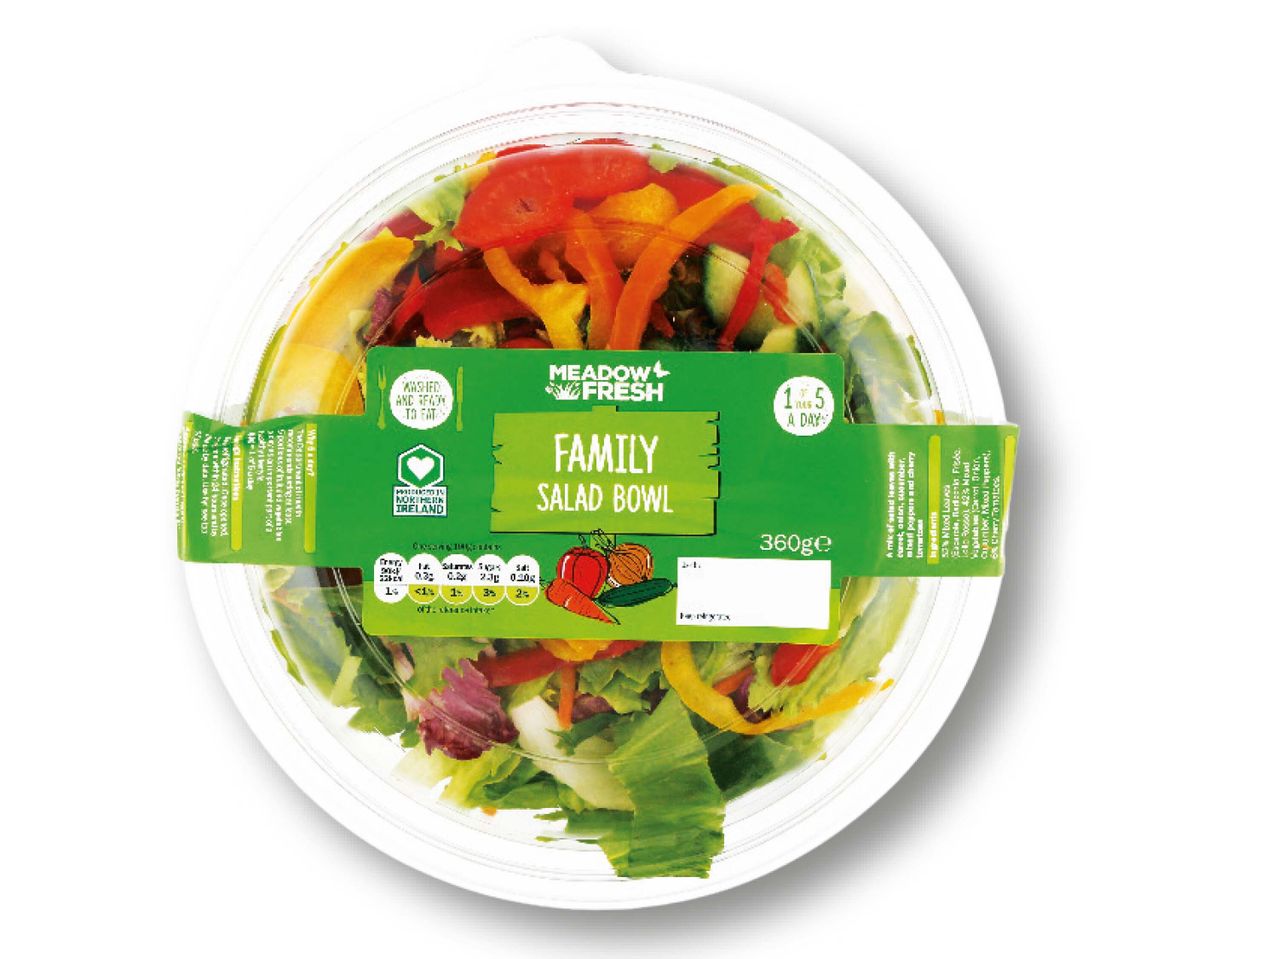 Go to full screen view: Family Salad Bowl - Image 1